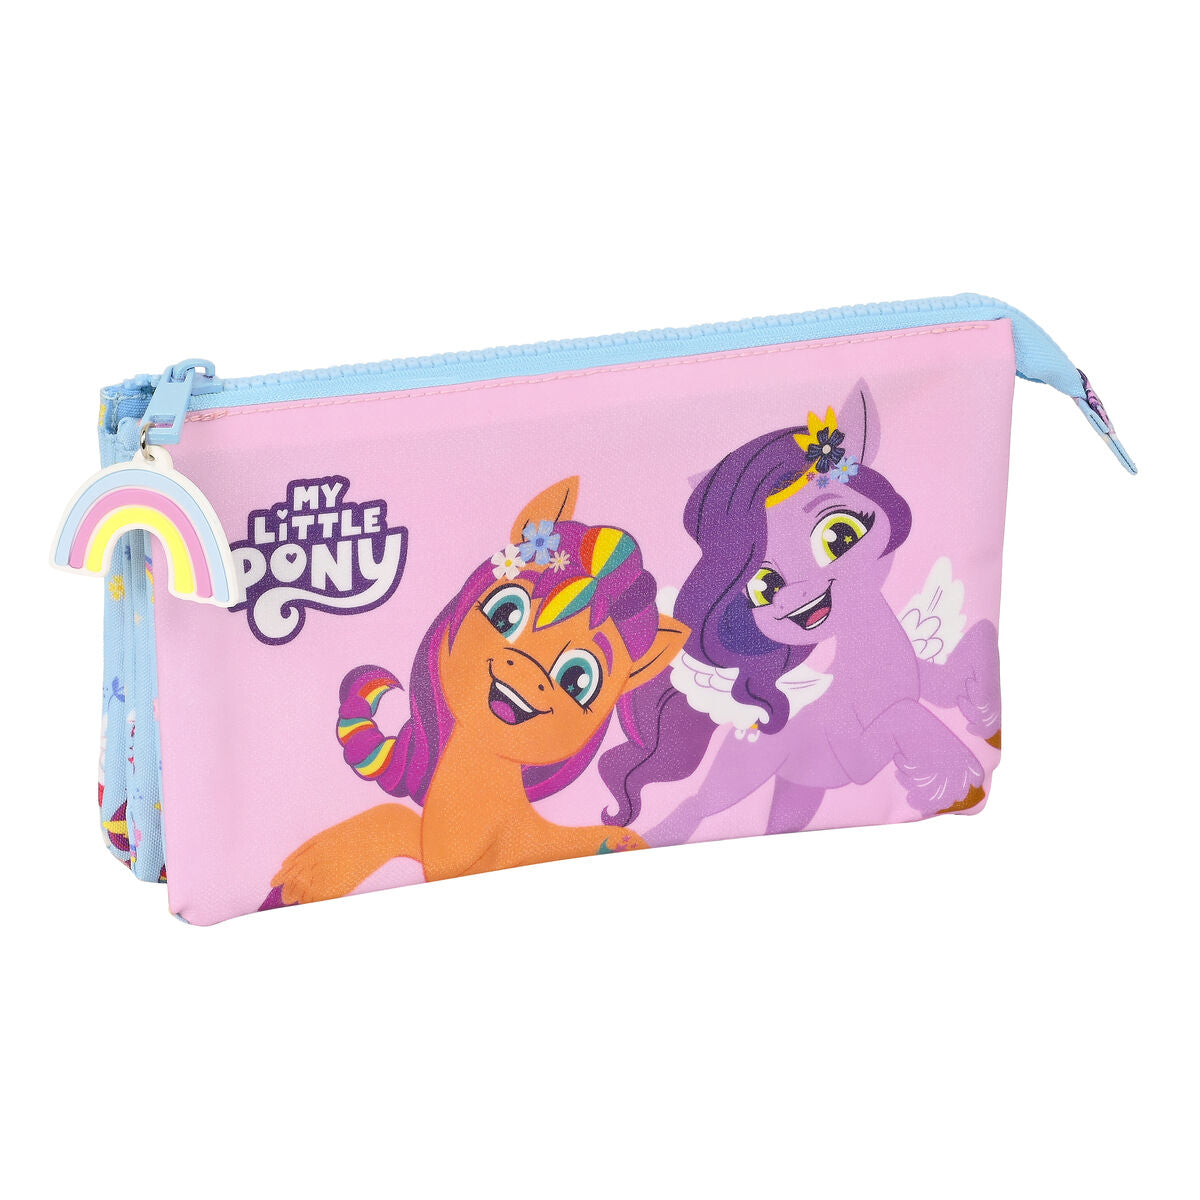 Triple Carry-all My Little Pony Wild & free Blue Pink 22 x 12 x 3